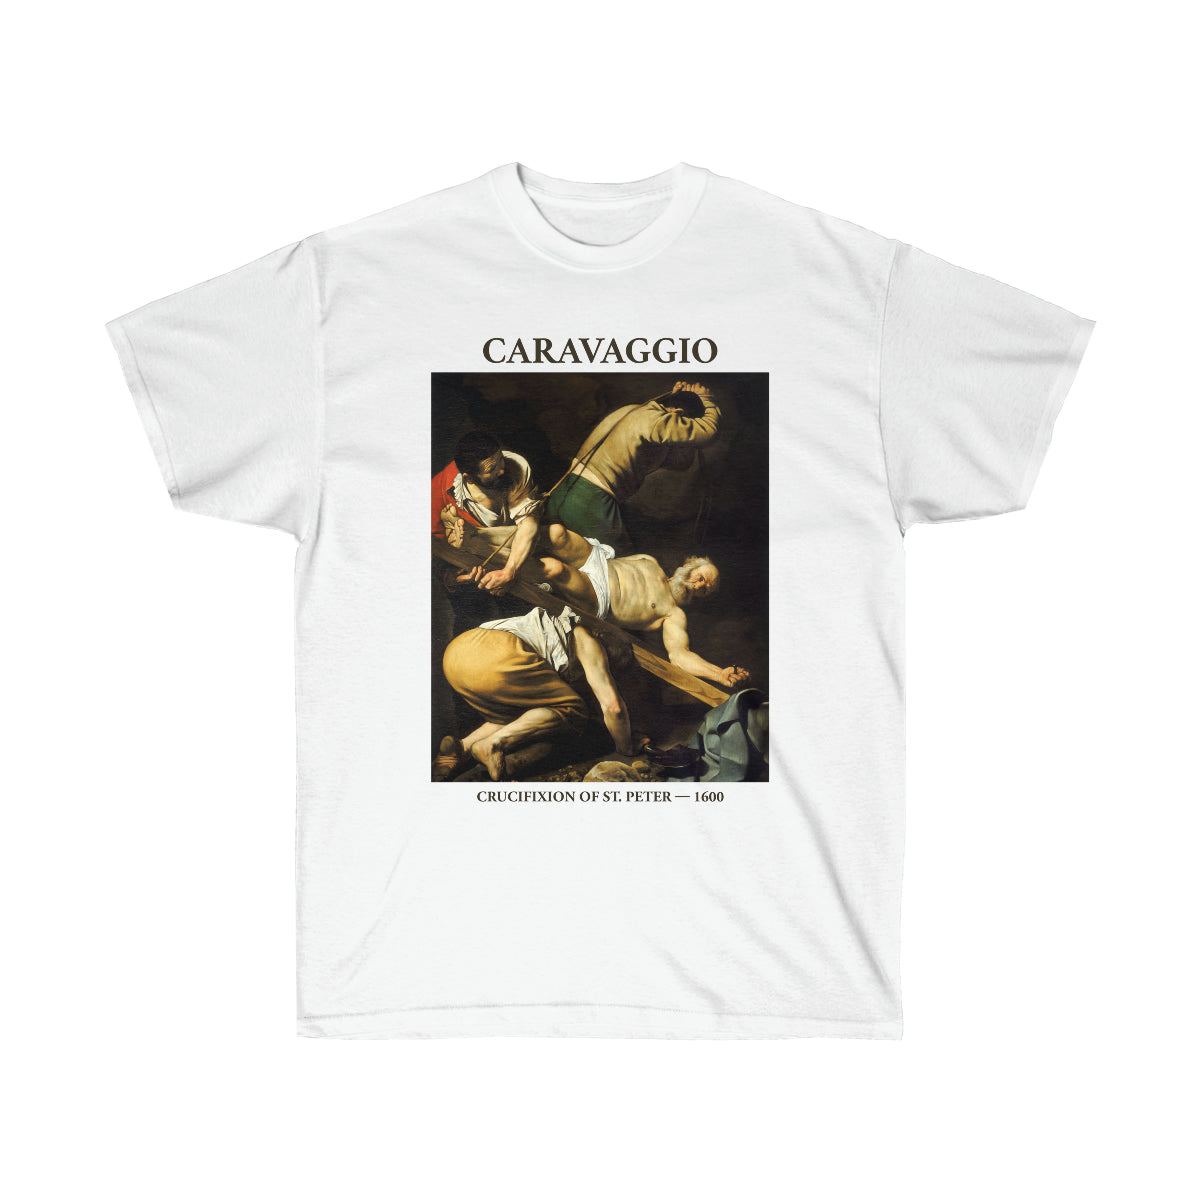 Crucifixion of St. Peter T-shirt